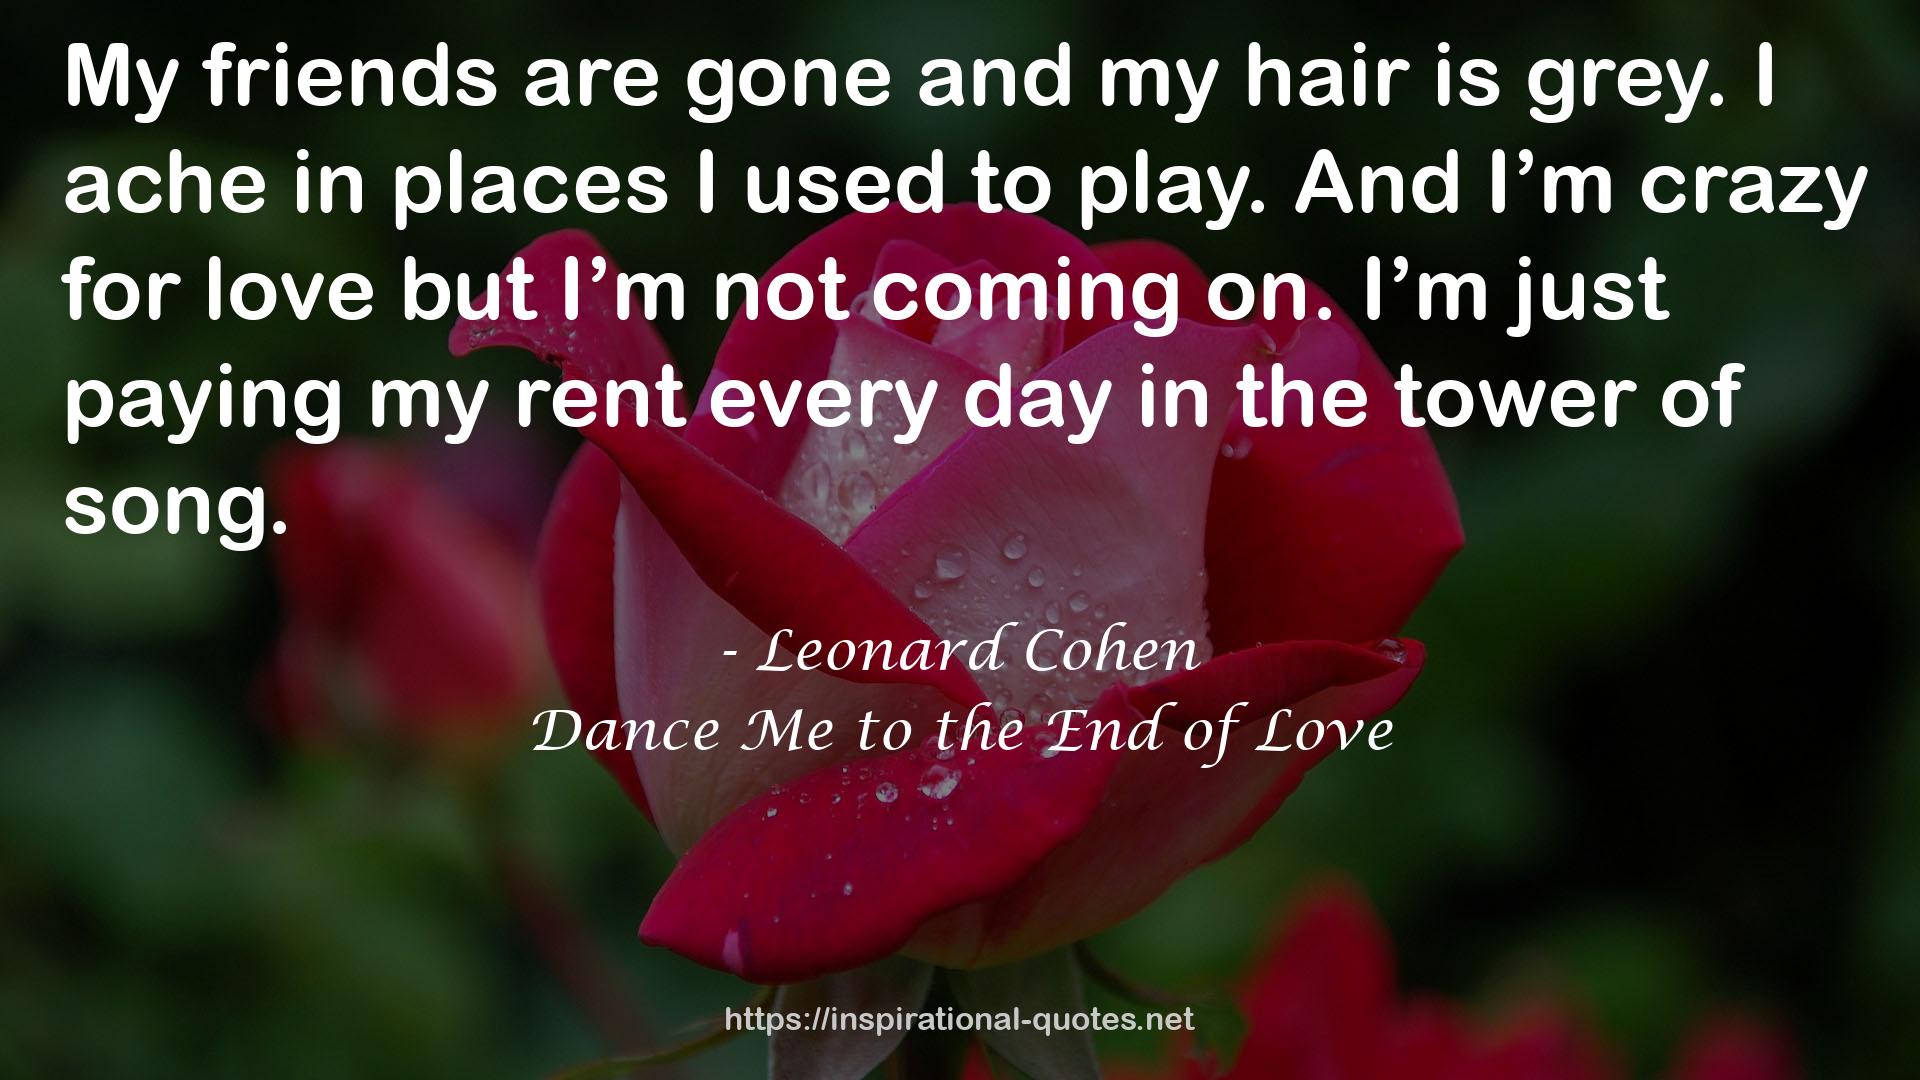 Dance Me to the End of Love QUOTES